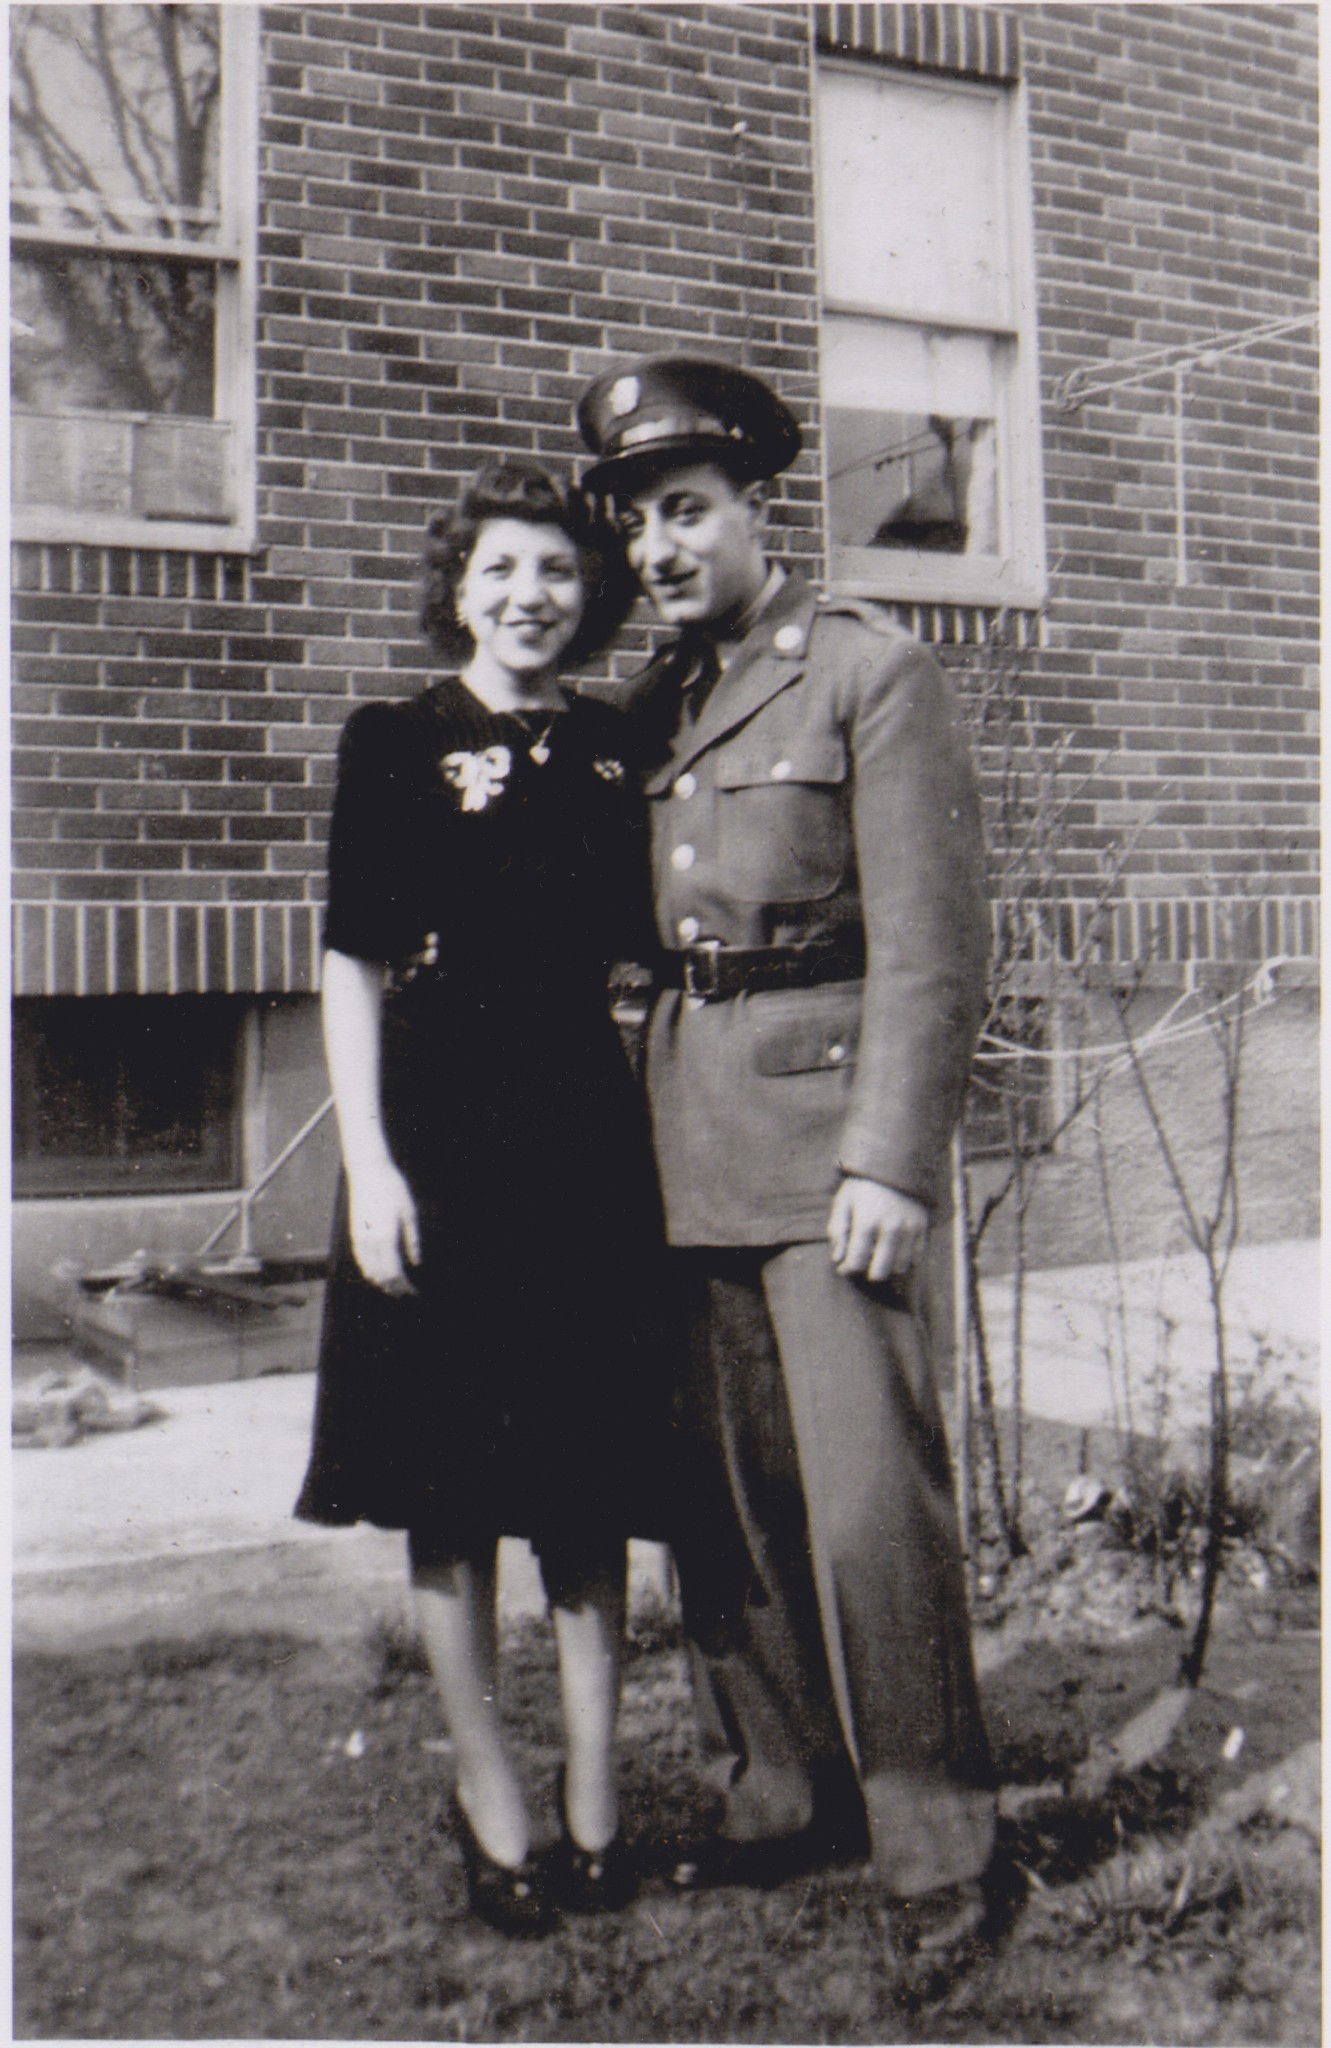 My Grandparents During WWII